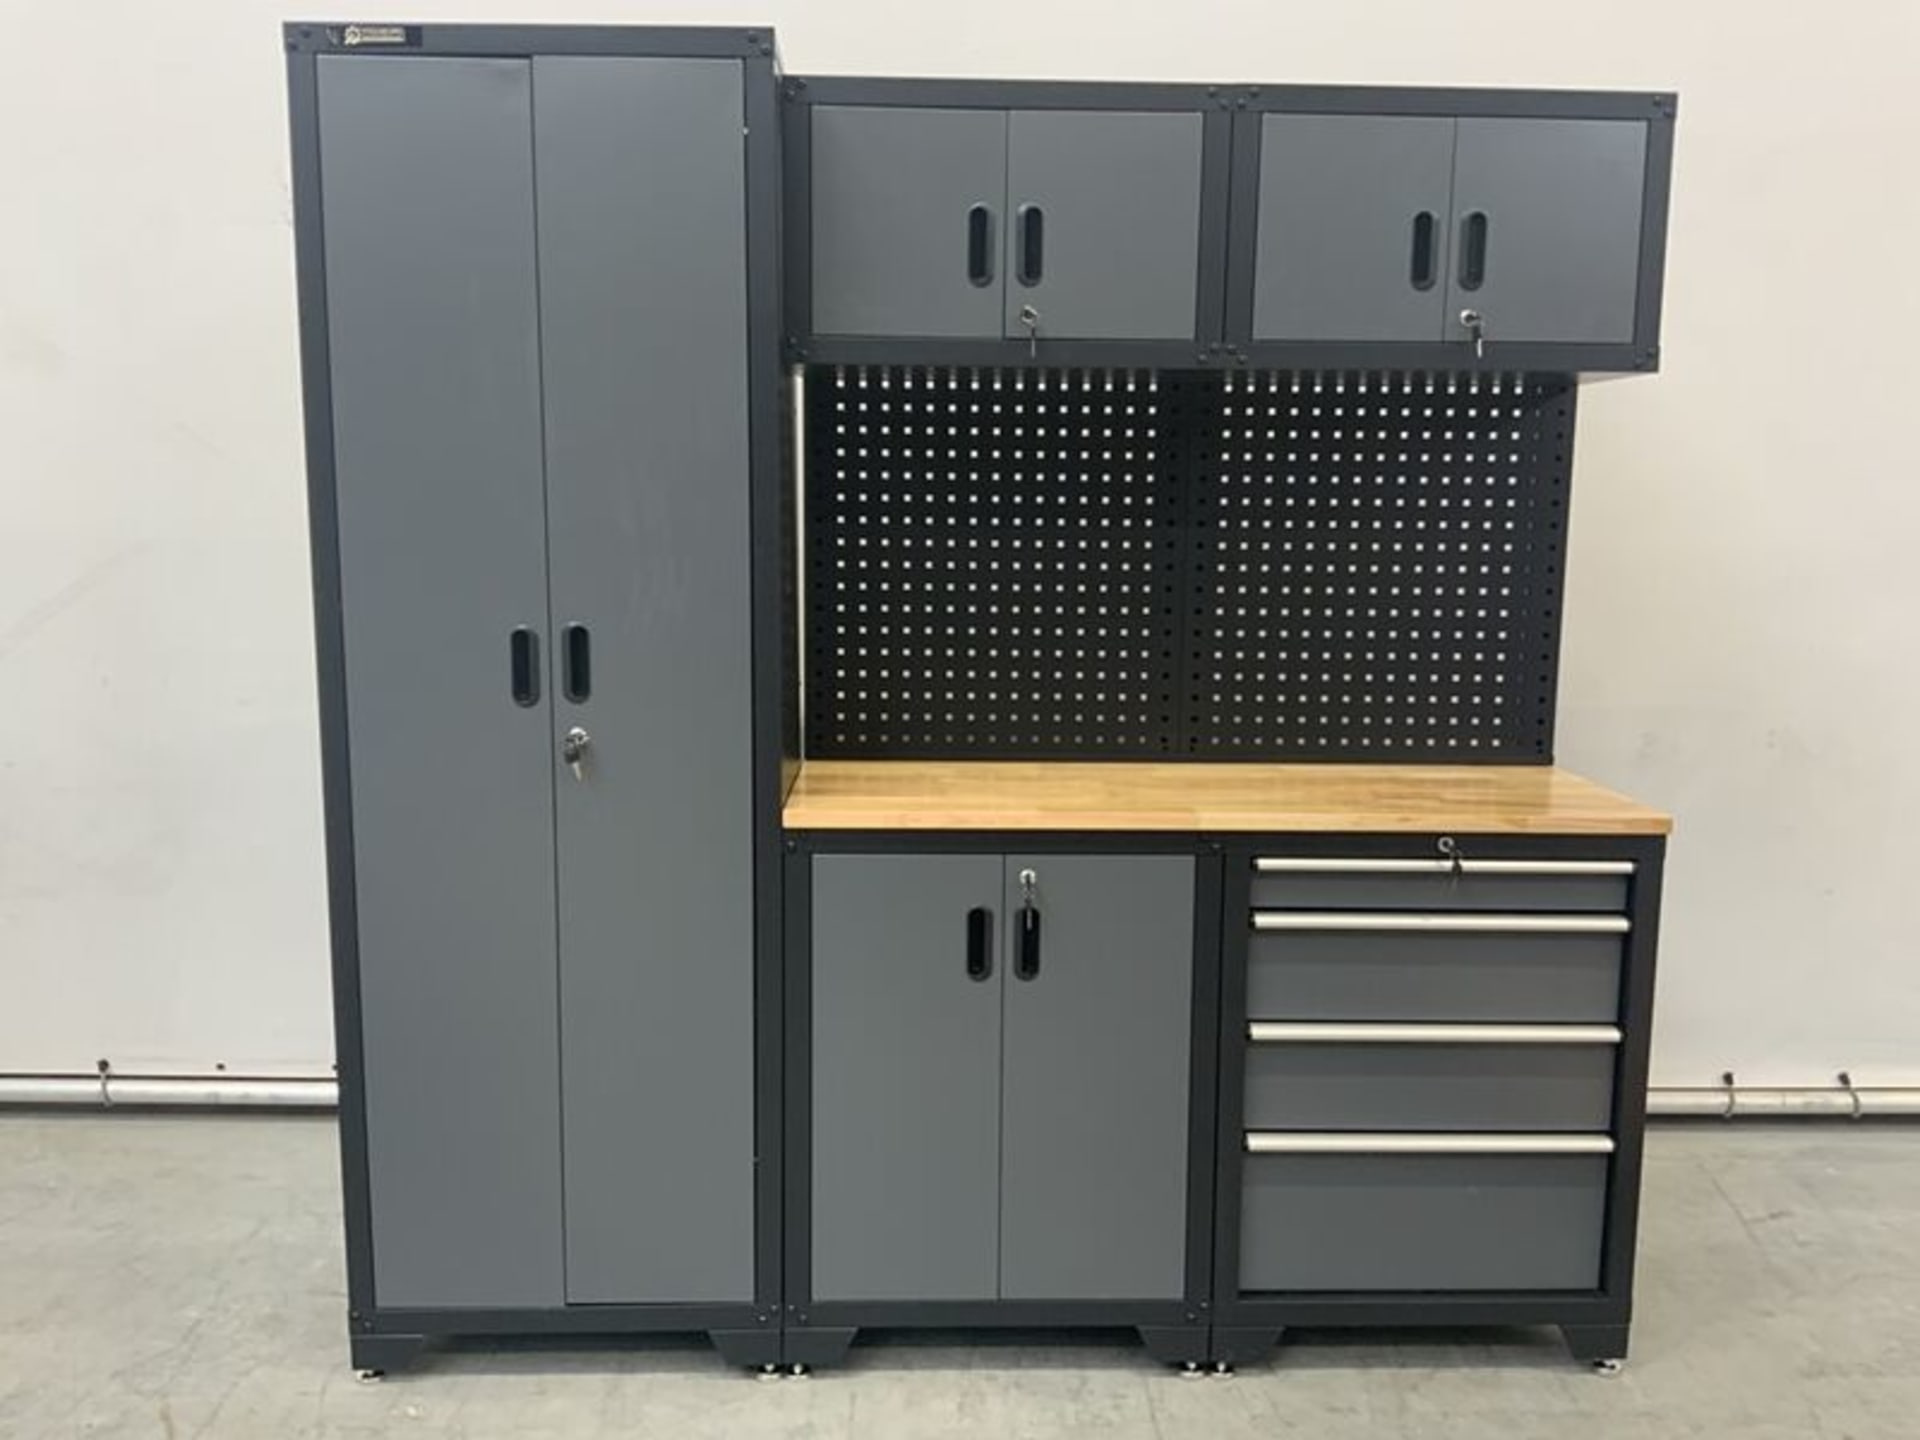 Magnum Metal Storage Cabinets by Steel Cabinets USA